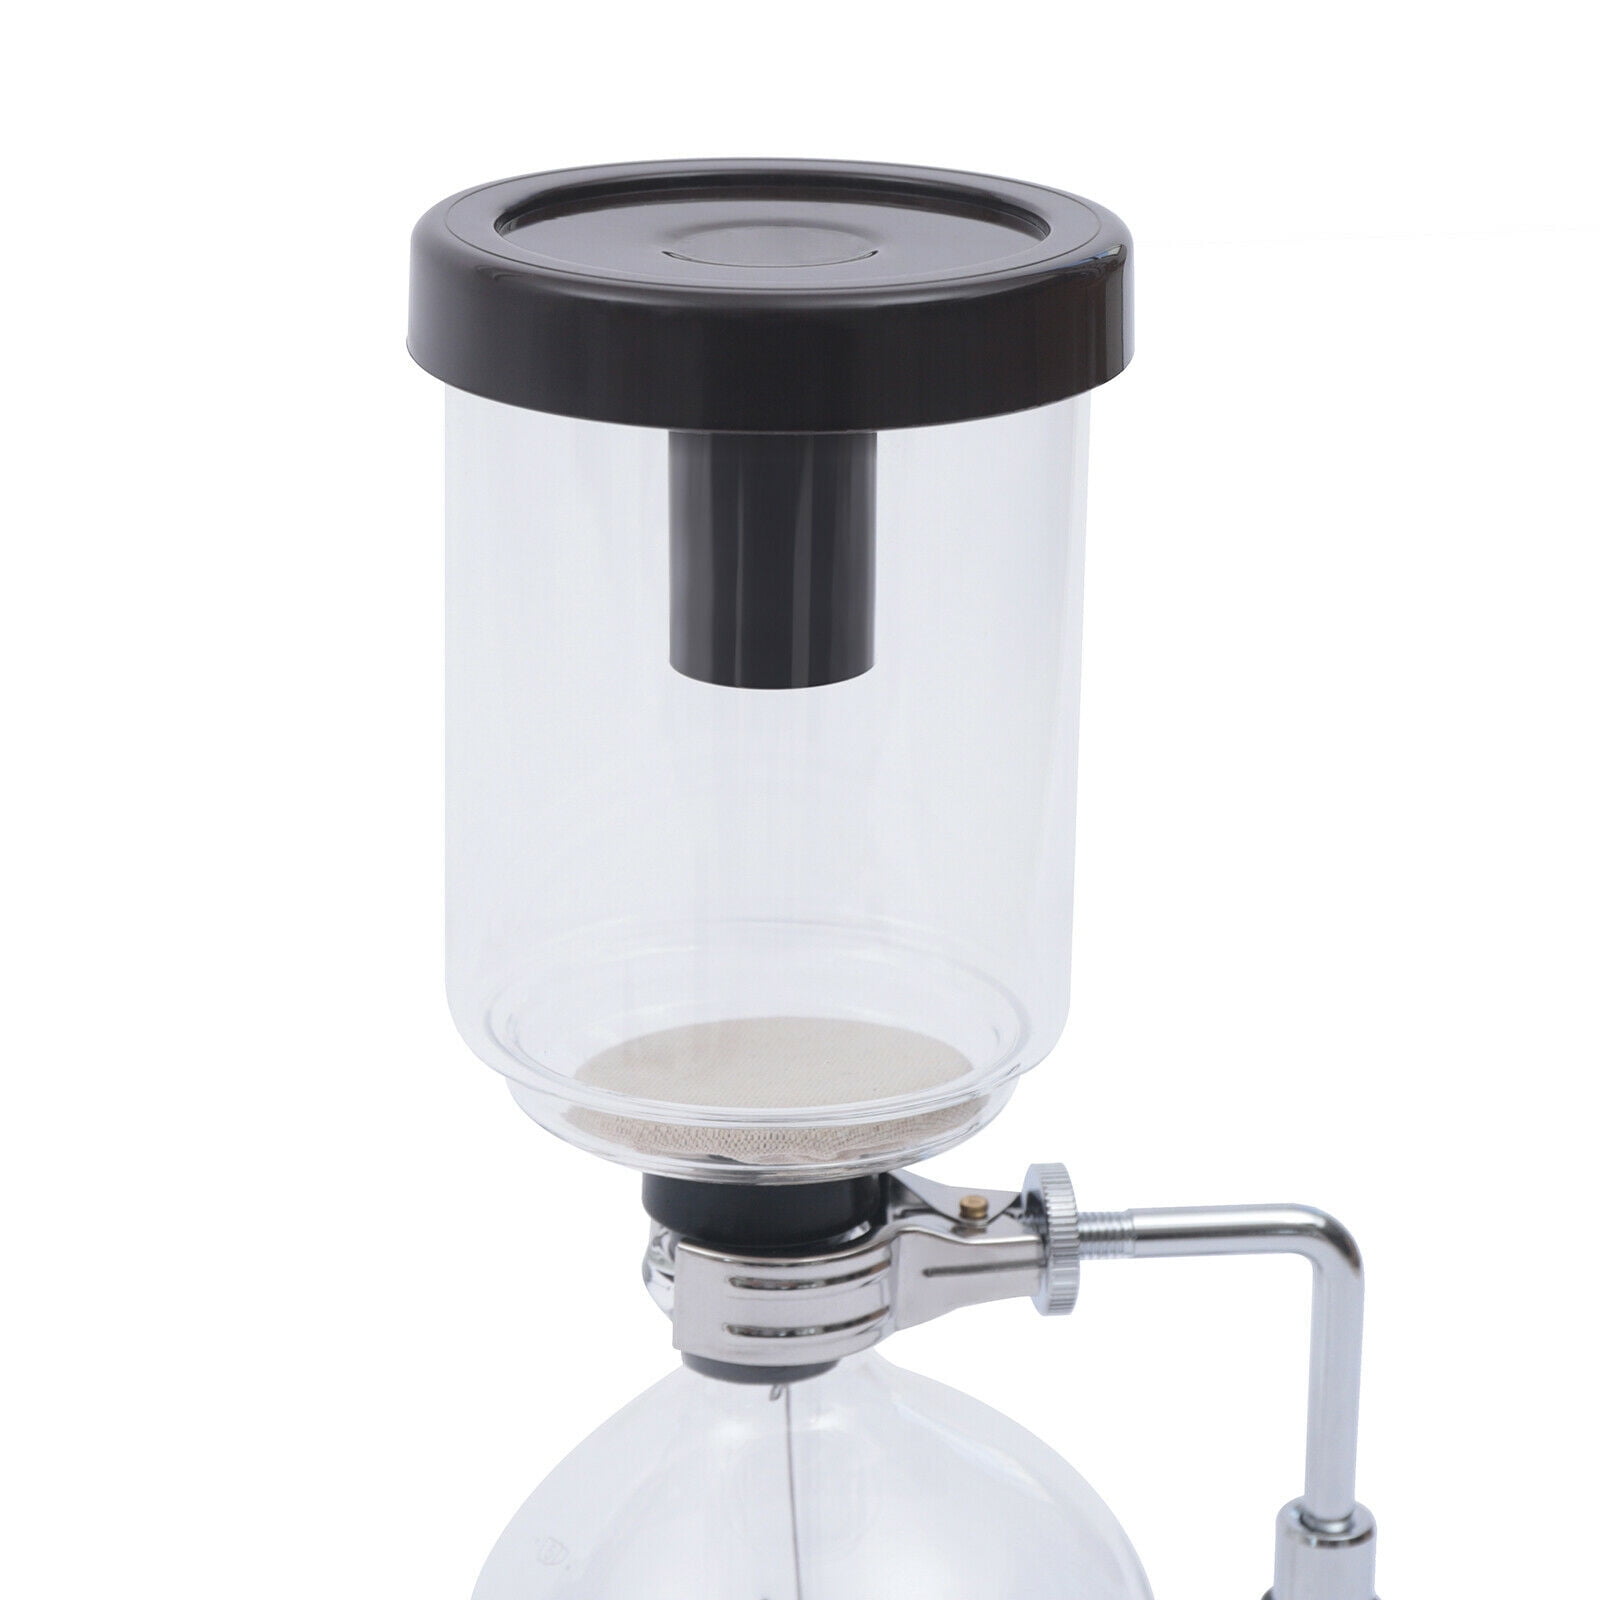  TEMKIN Cafetera Syphon Coffee Maker Japanese Style Vacuum Glass  Siphon Pot Percolators 3-5 Cups Glass Tabletop Siphon Coffee Maker for  Coffee or Tea Teapots (Size : 5 Cups): Home & Kitchen